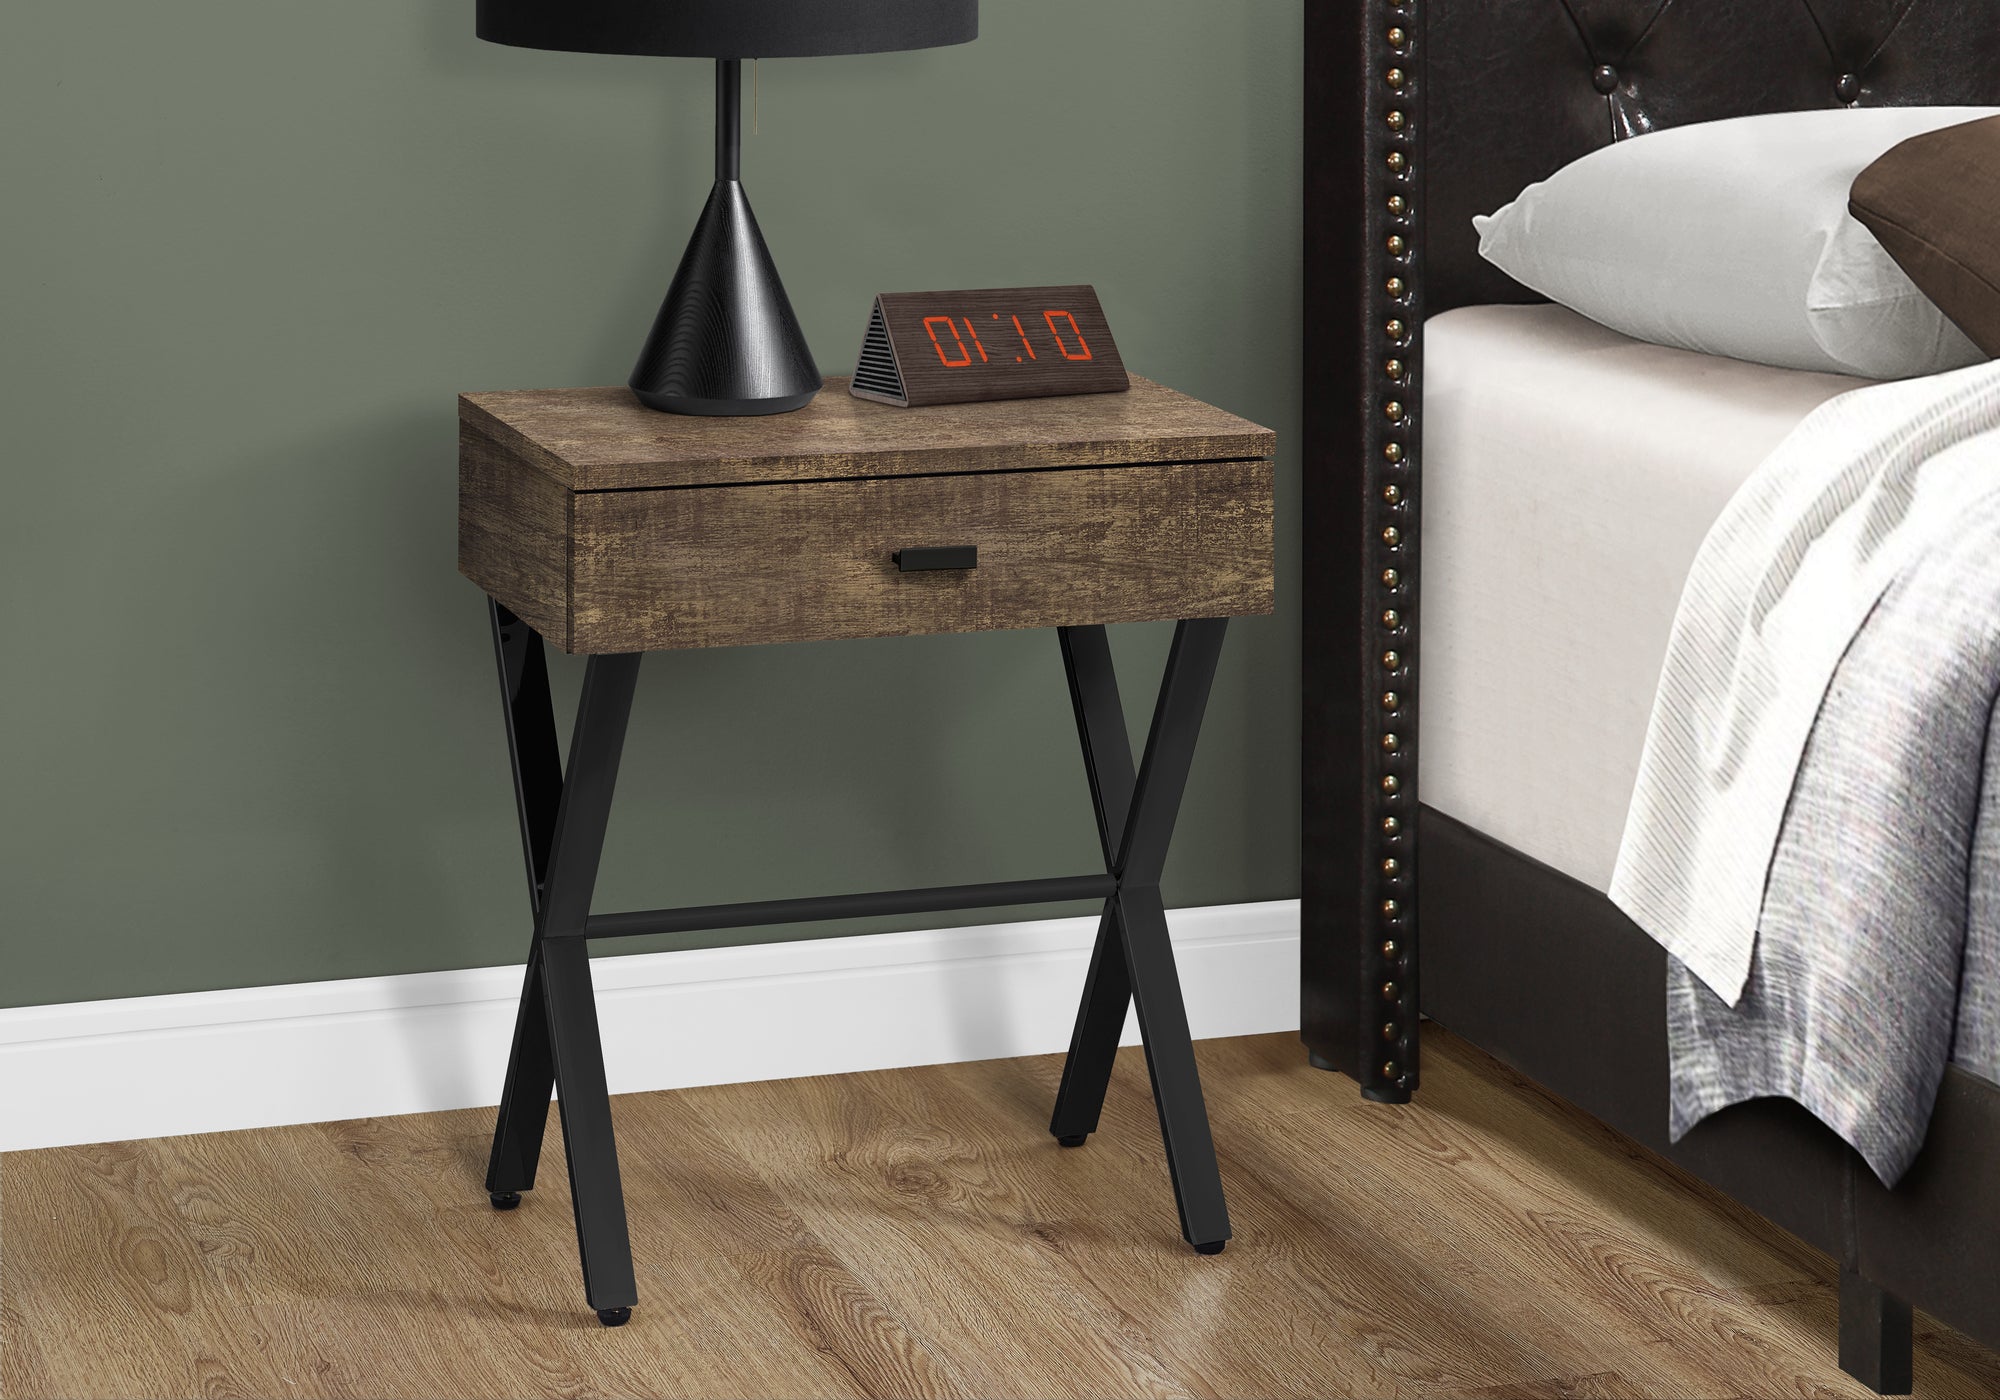 Accent Table - 24H / Brown Reclaimed Wood / Black Metal